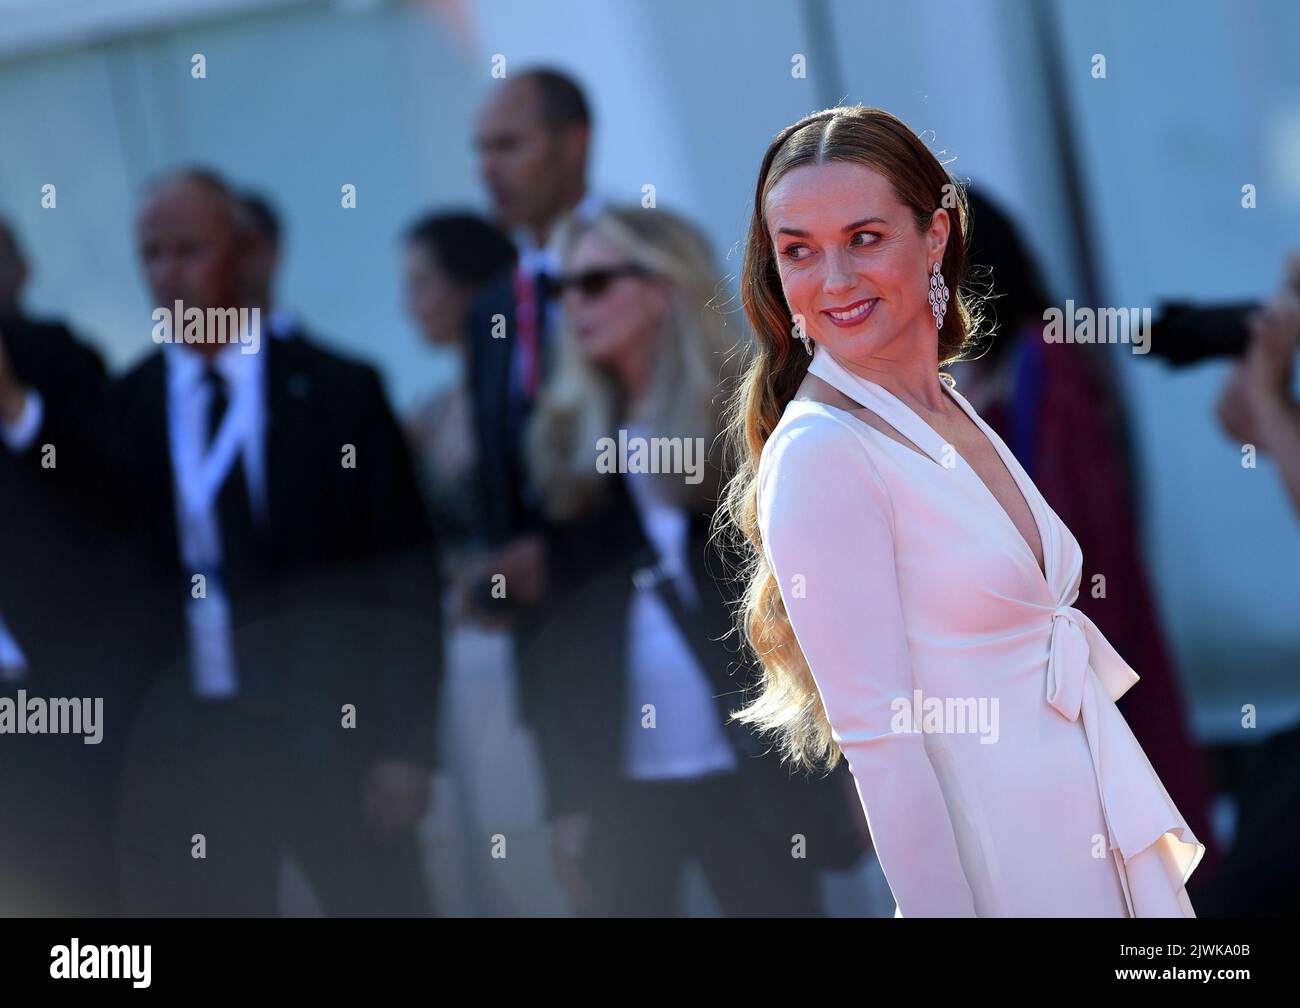 Venice, Italy. 5th Sep, 2022. Actress Kerry Condon poses on the red carpet for the premiere of the film 'The Banshees of Inisherin' during the 79th Venice International Film Festival in Venice, Italy, on Sept. 5, 2022. Credit: Jin Mamengni/Xinhua/Alamy Live News Stock Photo